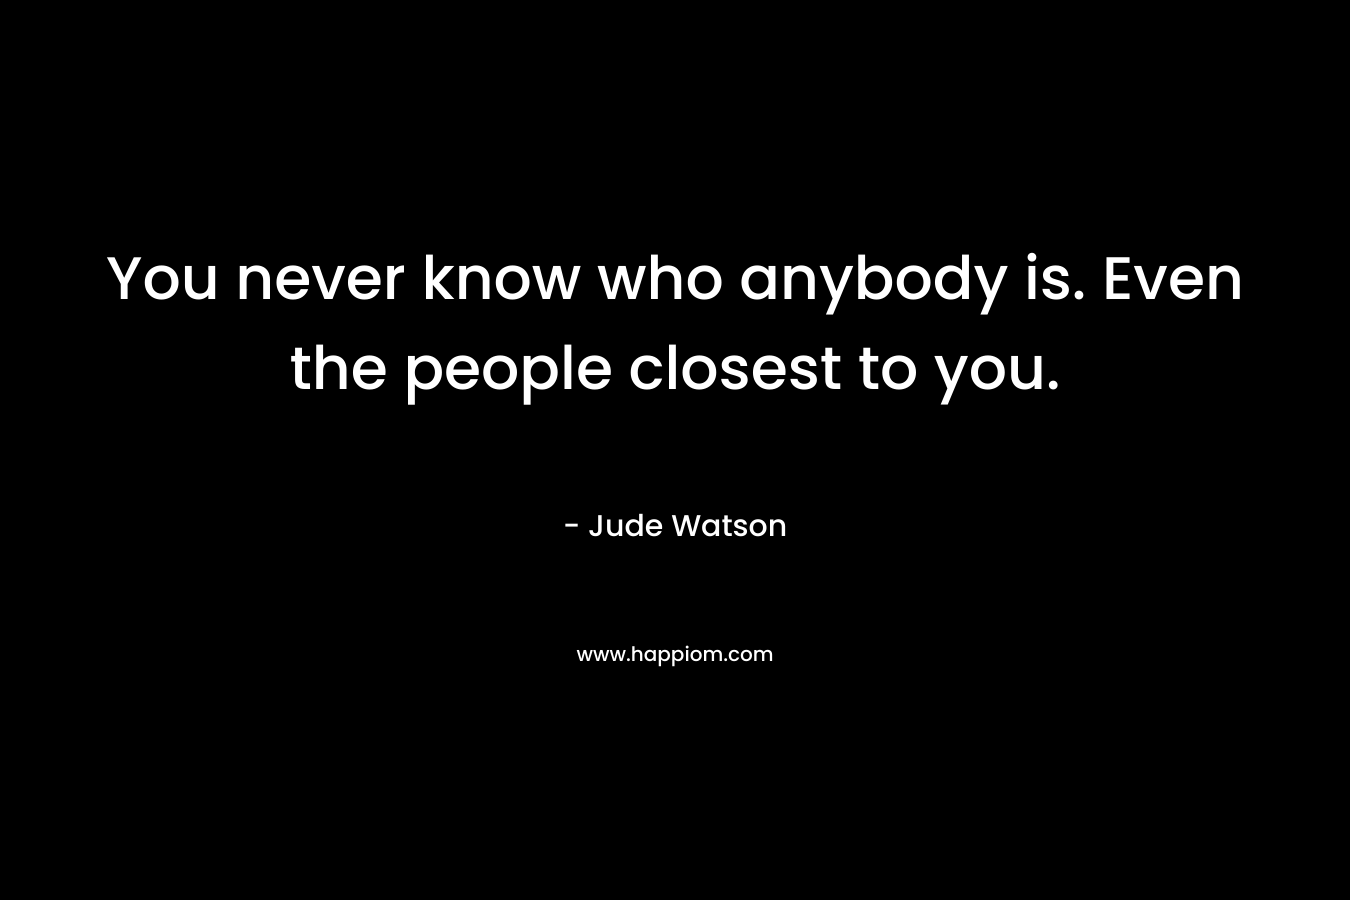 You never know who anybody is. Even the people closest to you.